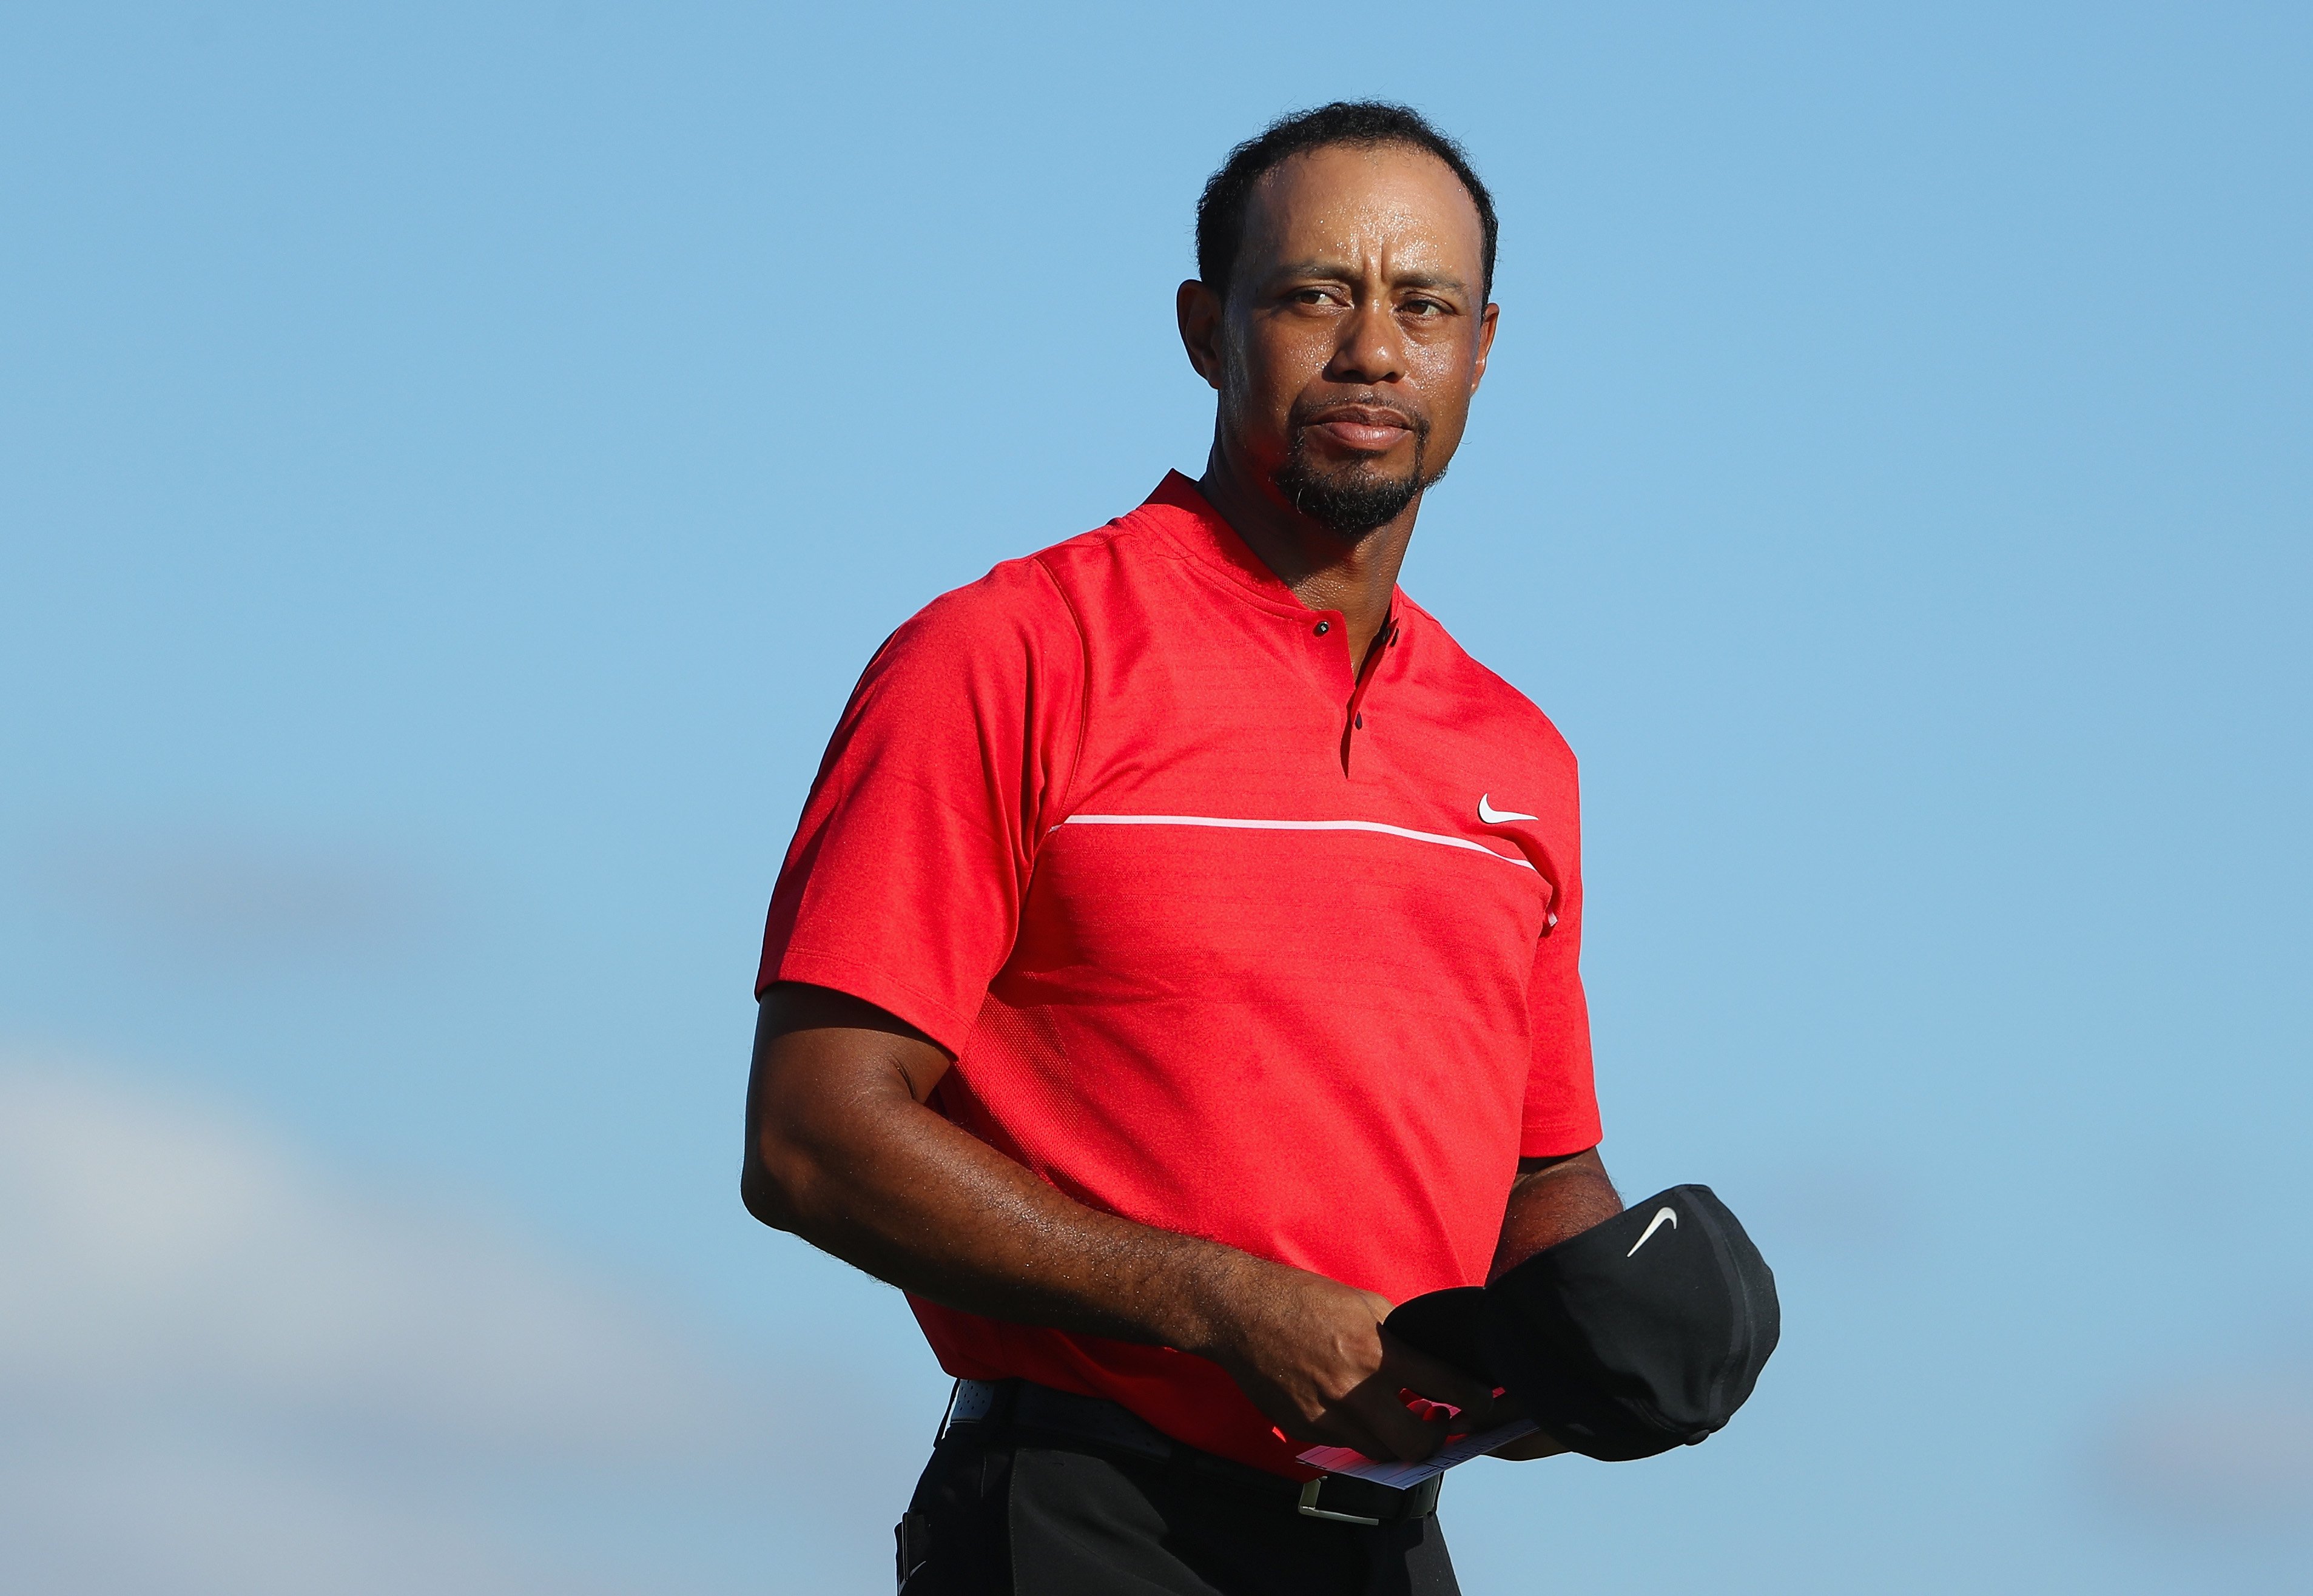 Tiger Woods during the final round of the Hero World Challenge at Albany. | Photo: GettyImages